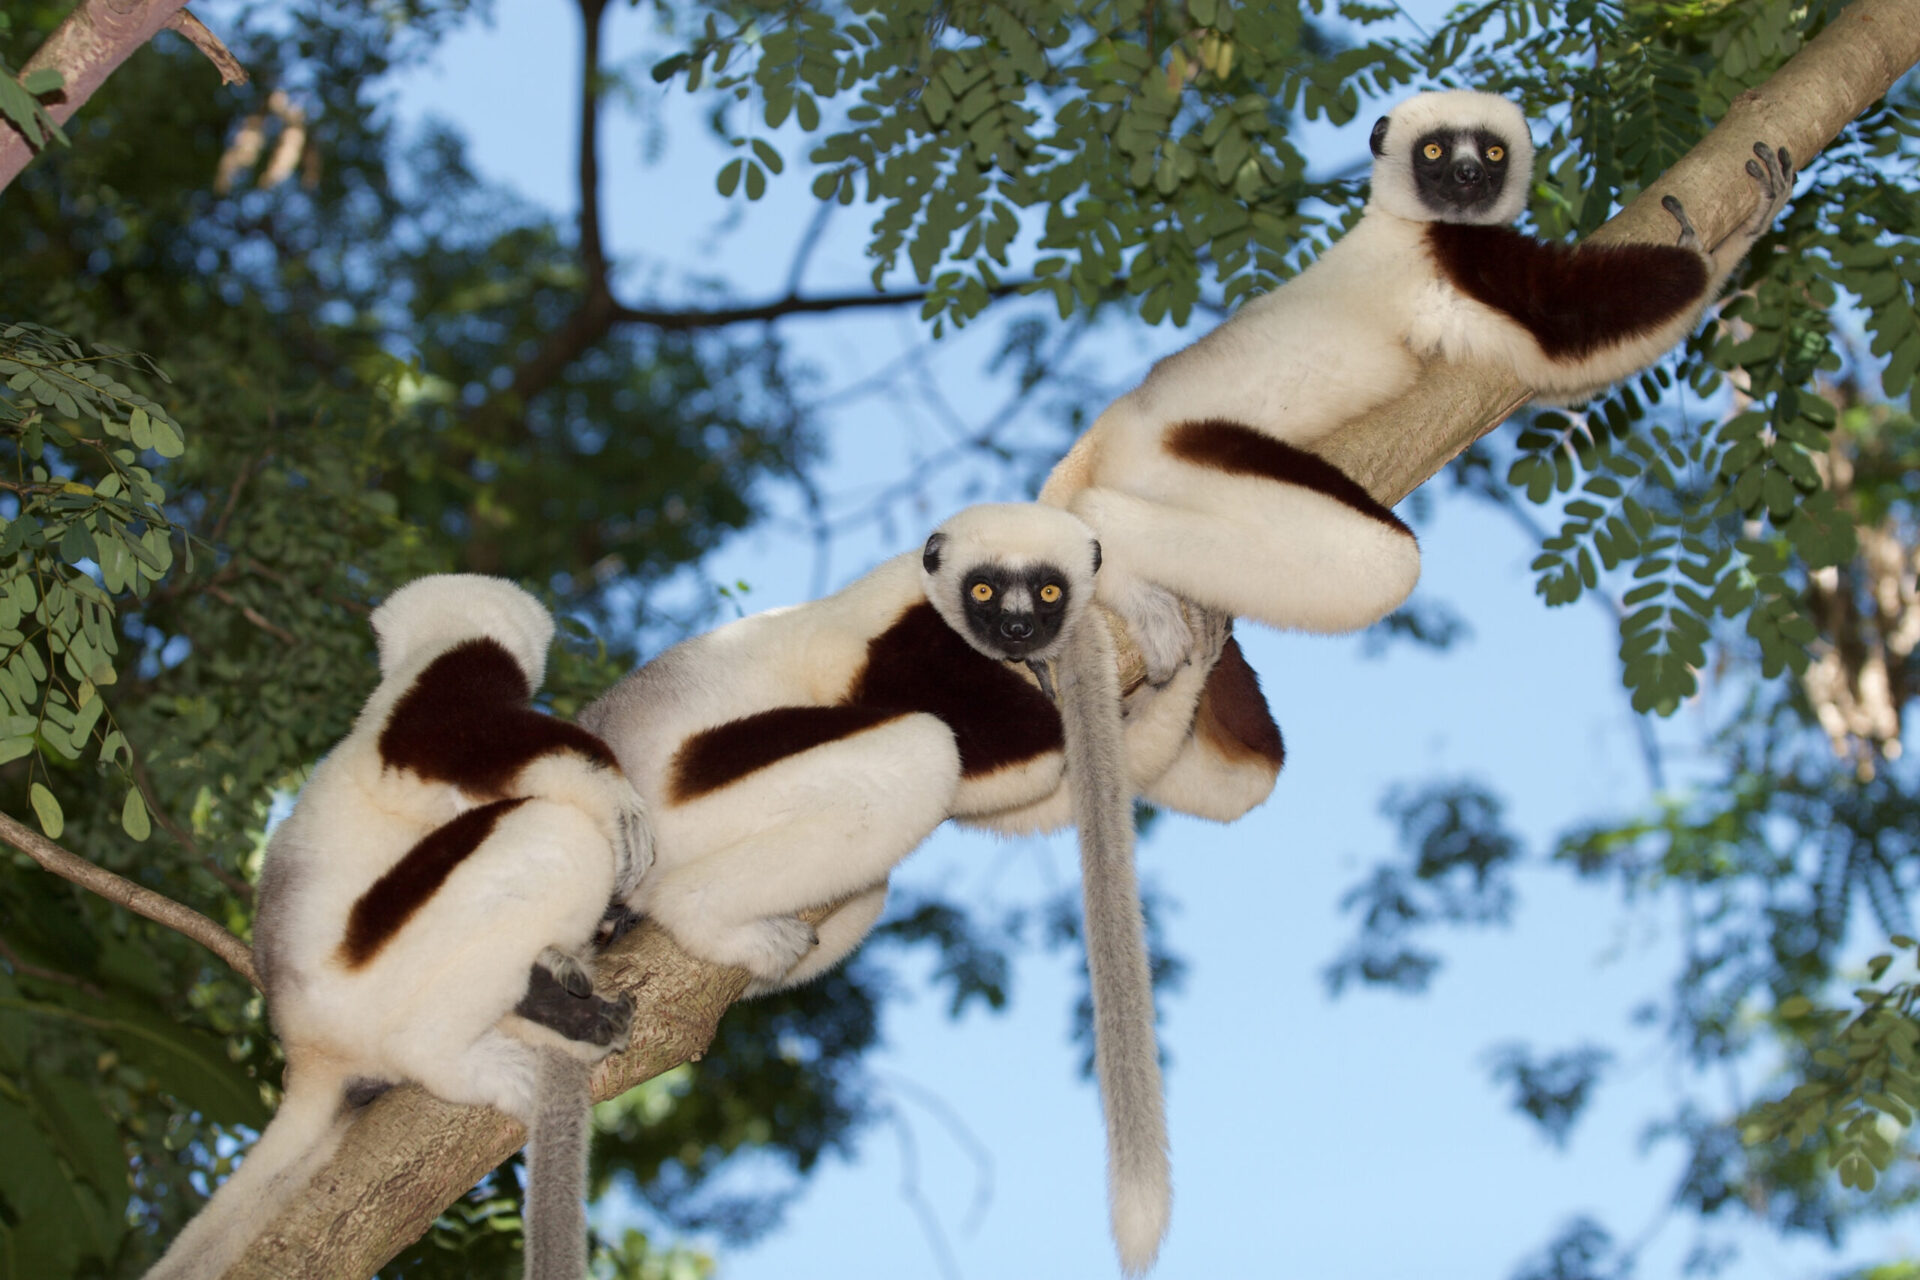 Trio of sifakas in a tree in Madagascar